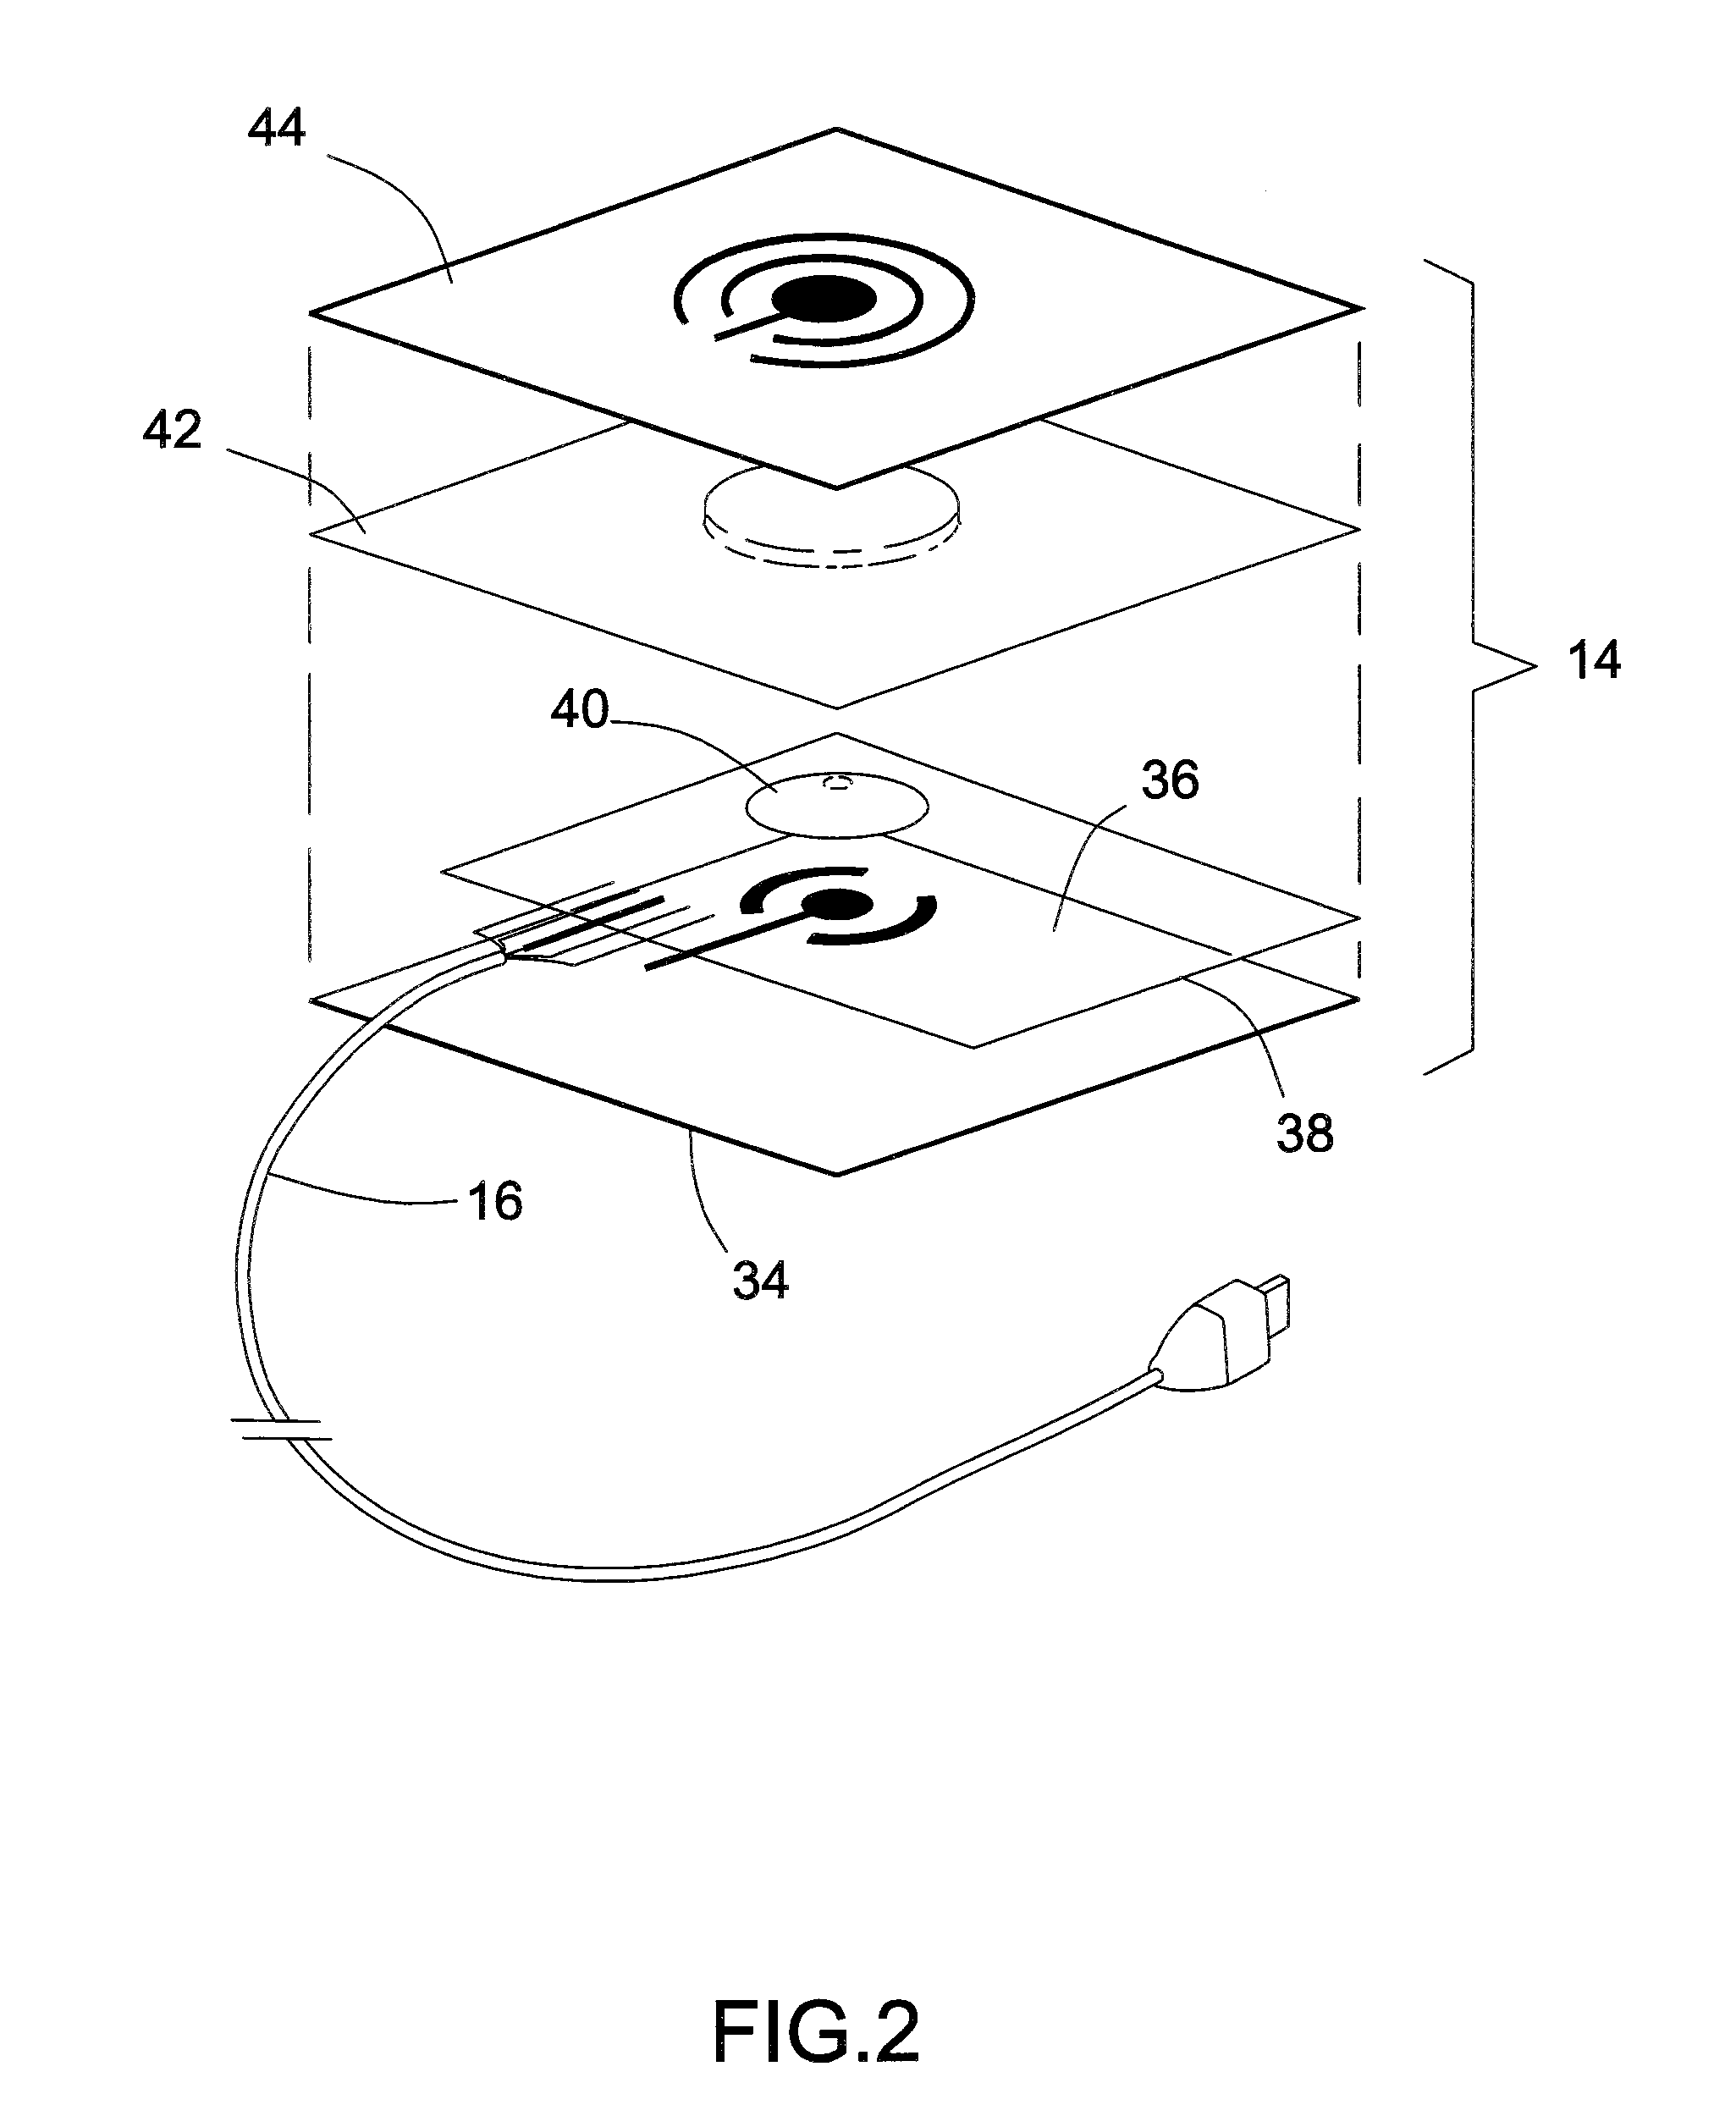 System and method of reducing risk and/or severity of pressure ulcers